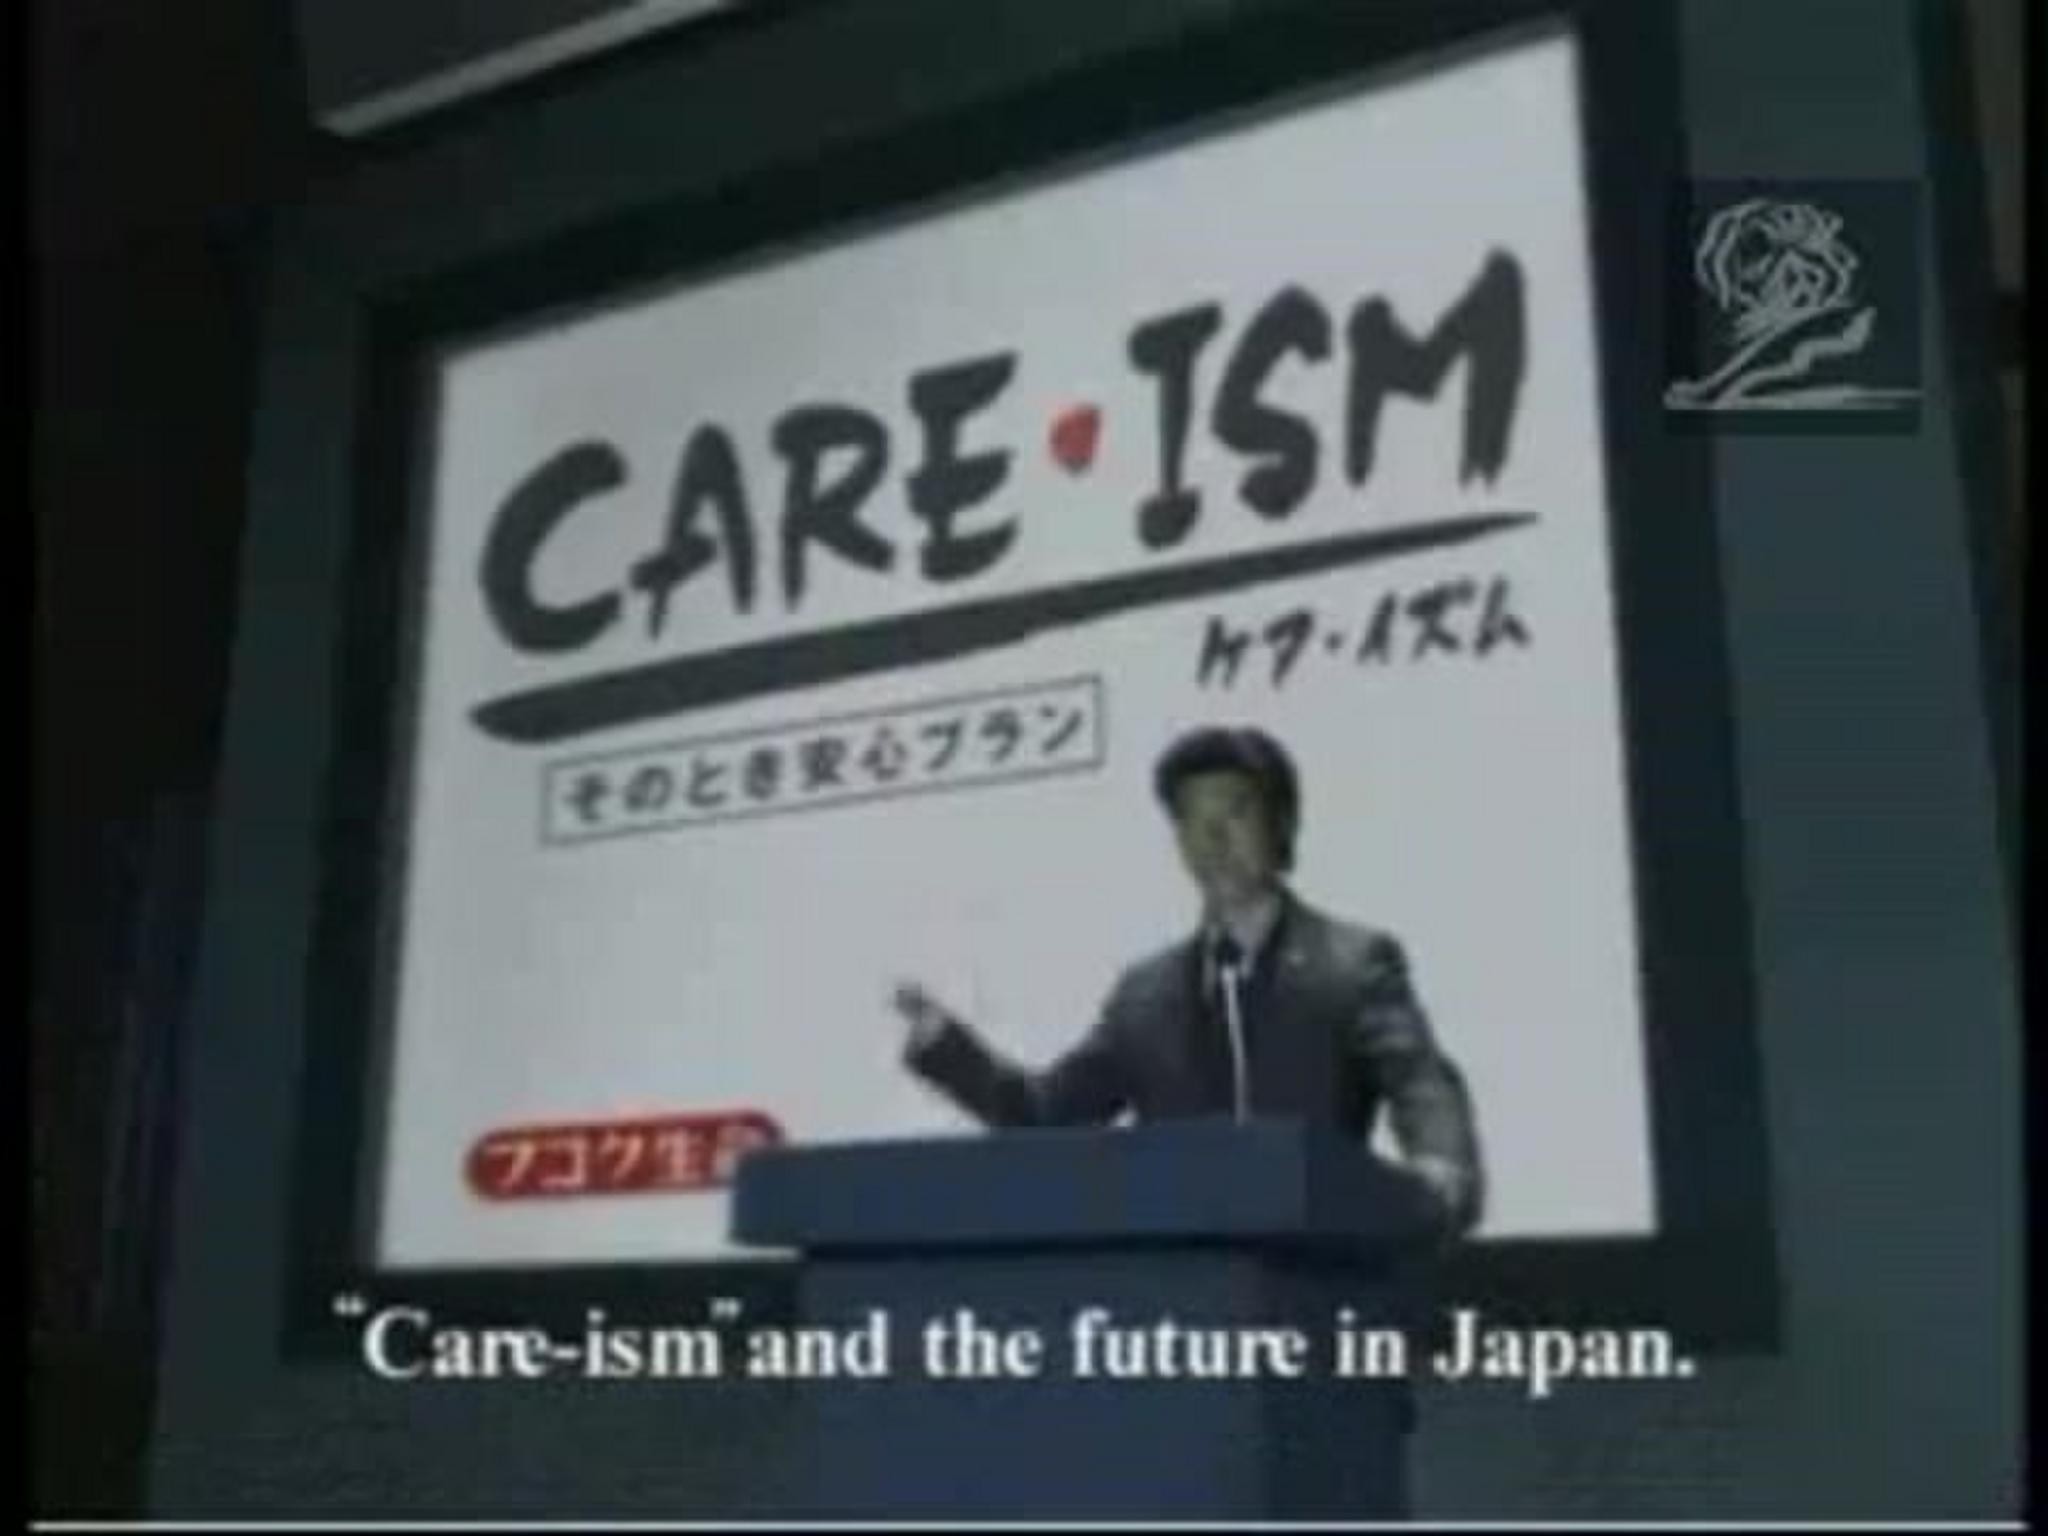 CARE-ISM INSURANCE